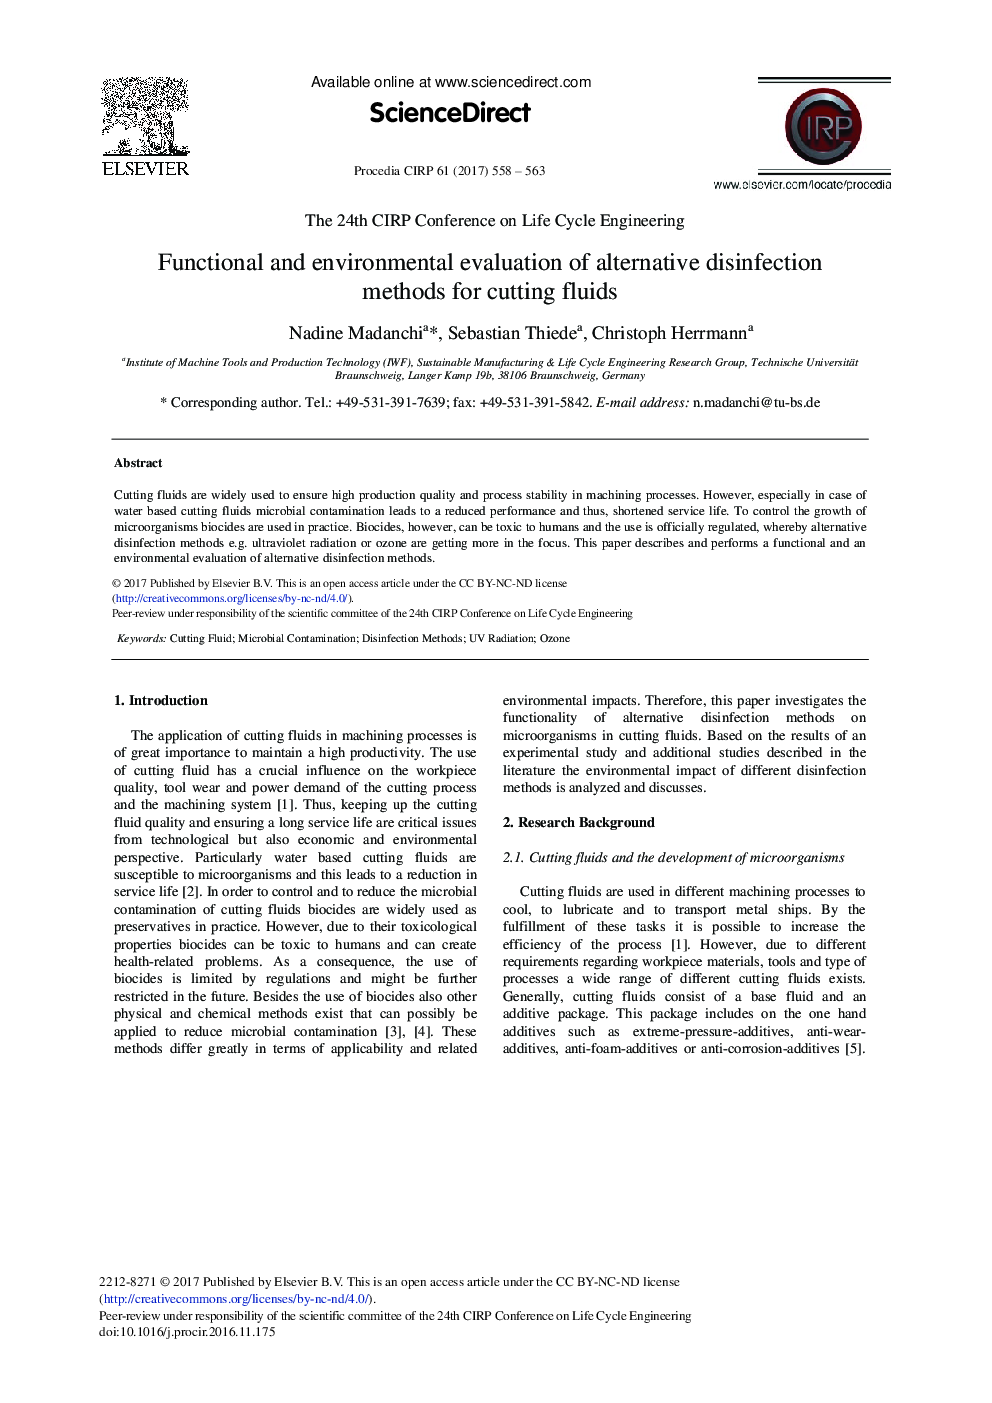 Functional and Environmental Evaluation of Alternative Disinfection Methods for Cutting Fluids